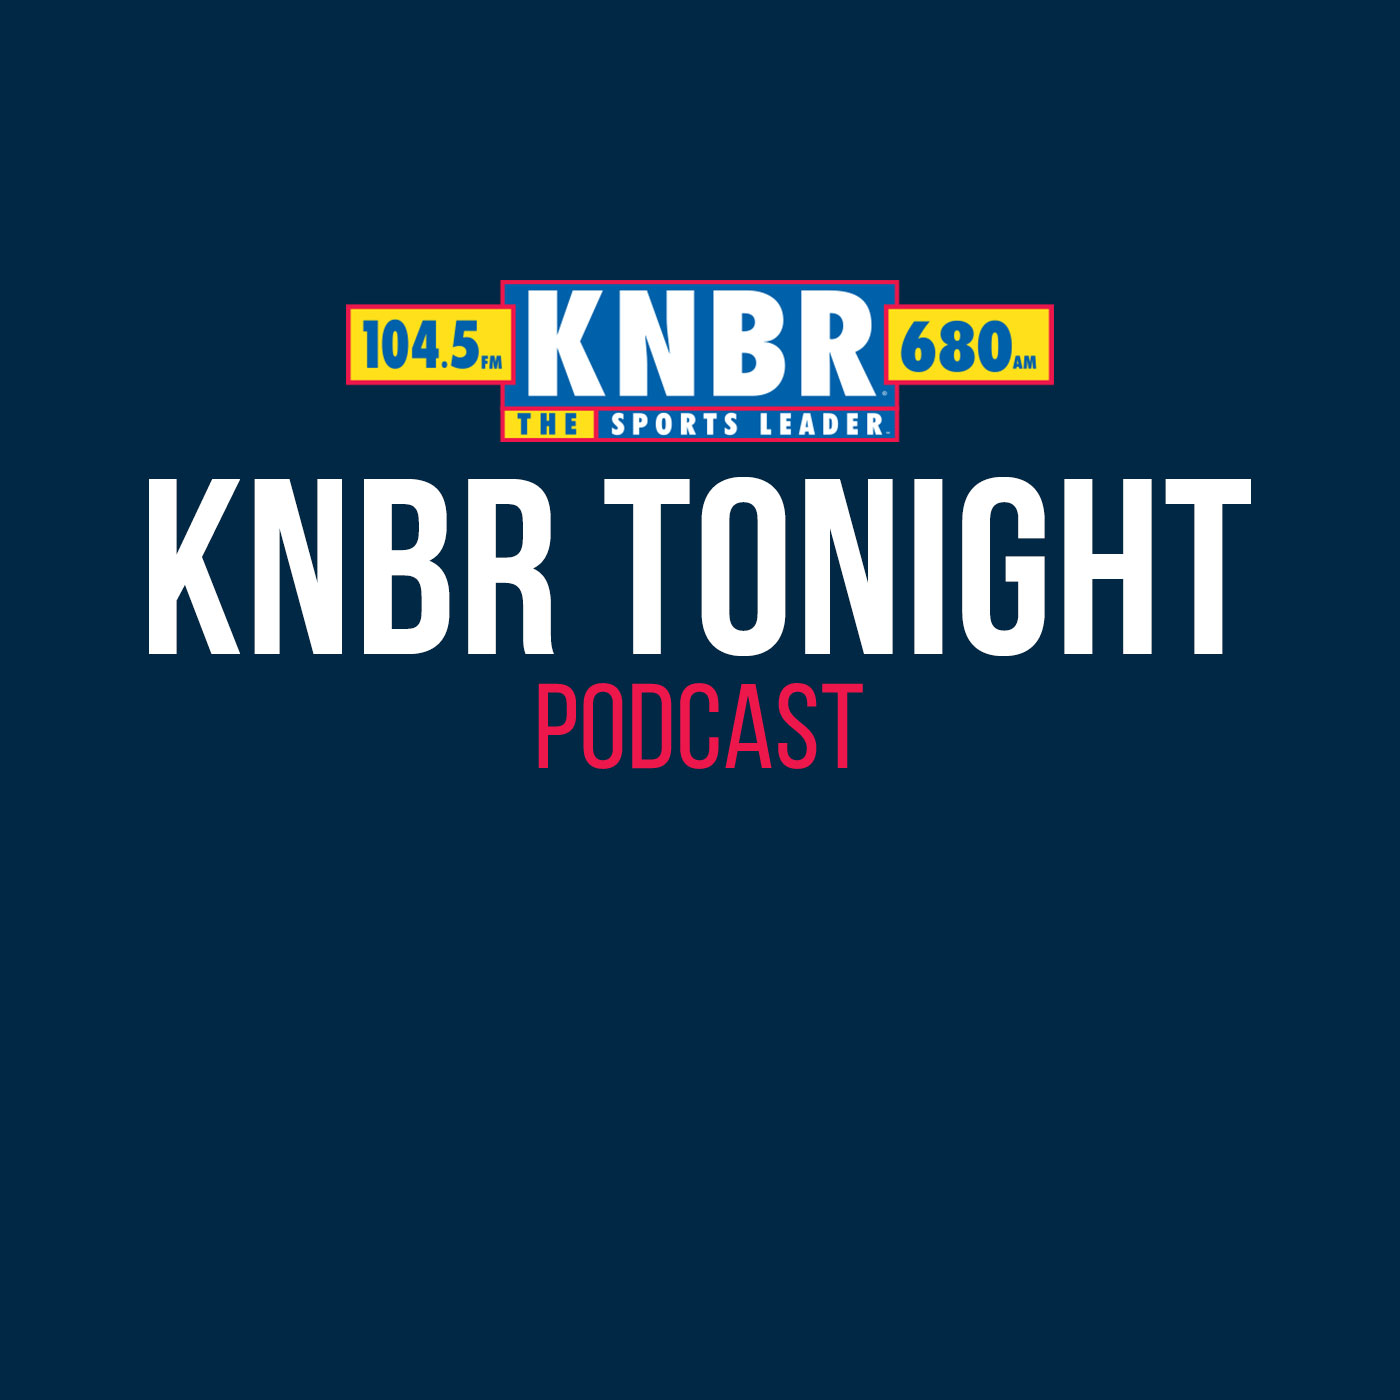 11-28 Jamey Eisenberg joins FP on KNBR Tonight to preview the 49ers vs Eagles Showdown this Sunday